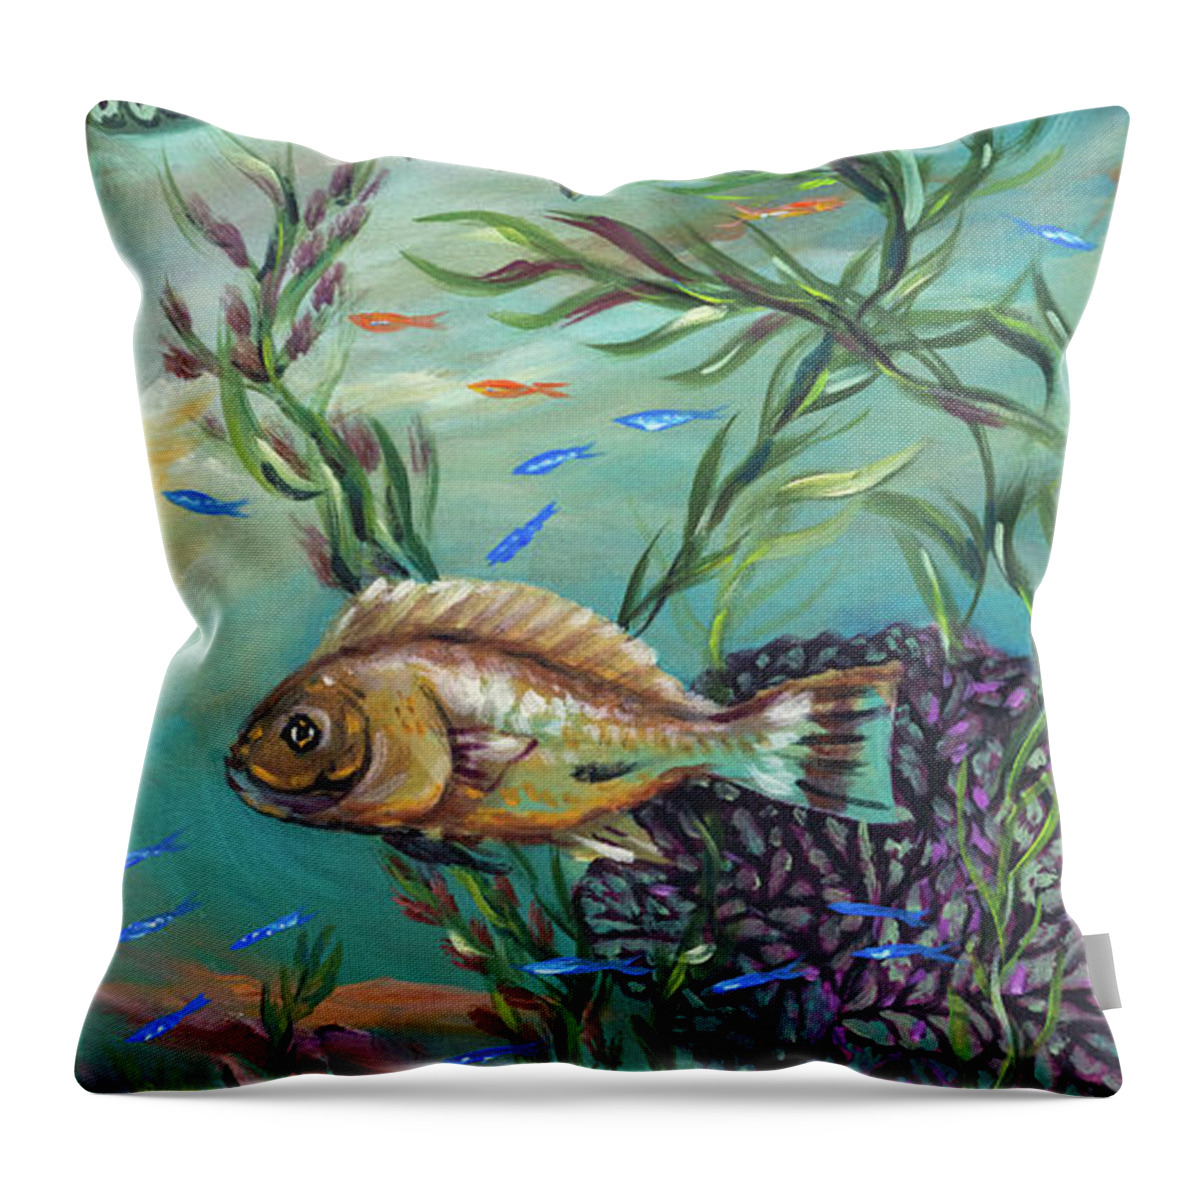 Coral Reef Throw Pillow featuring the painting Entangled Right by Linda Olsen